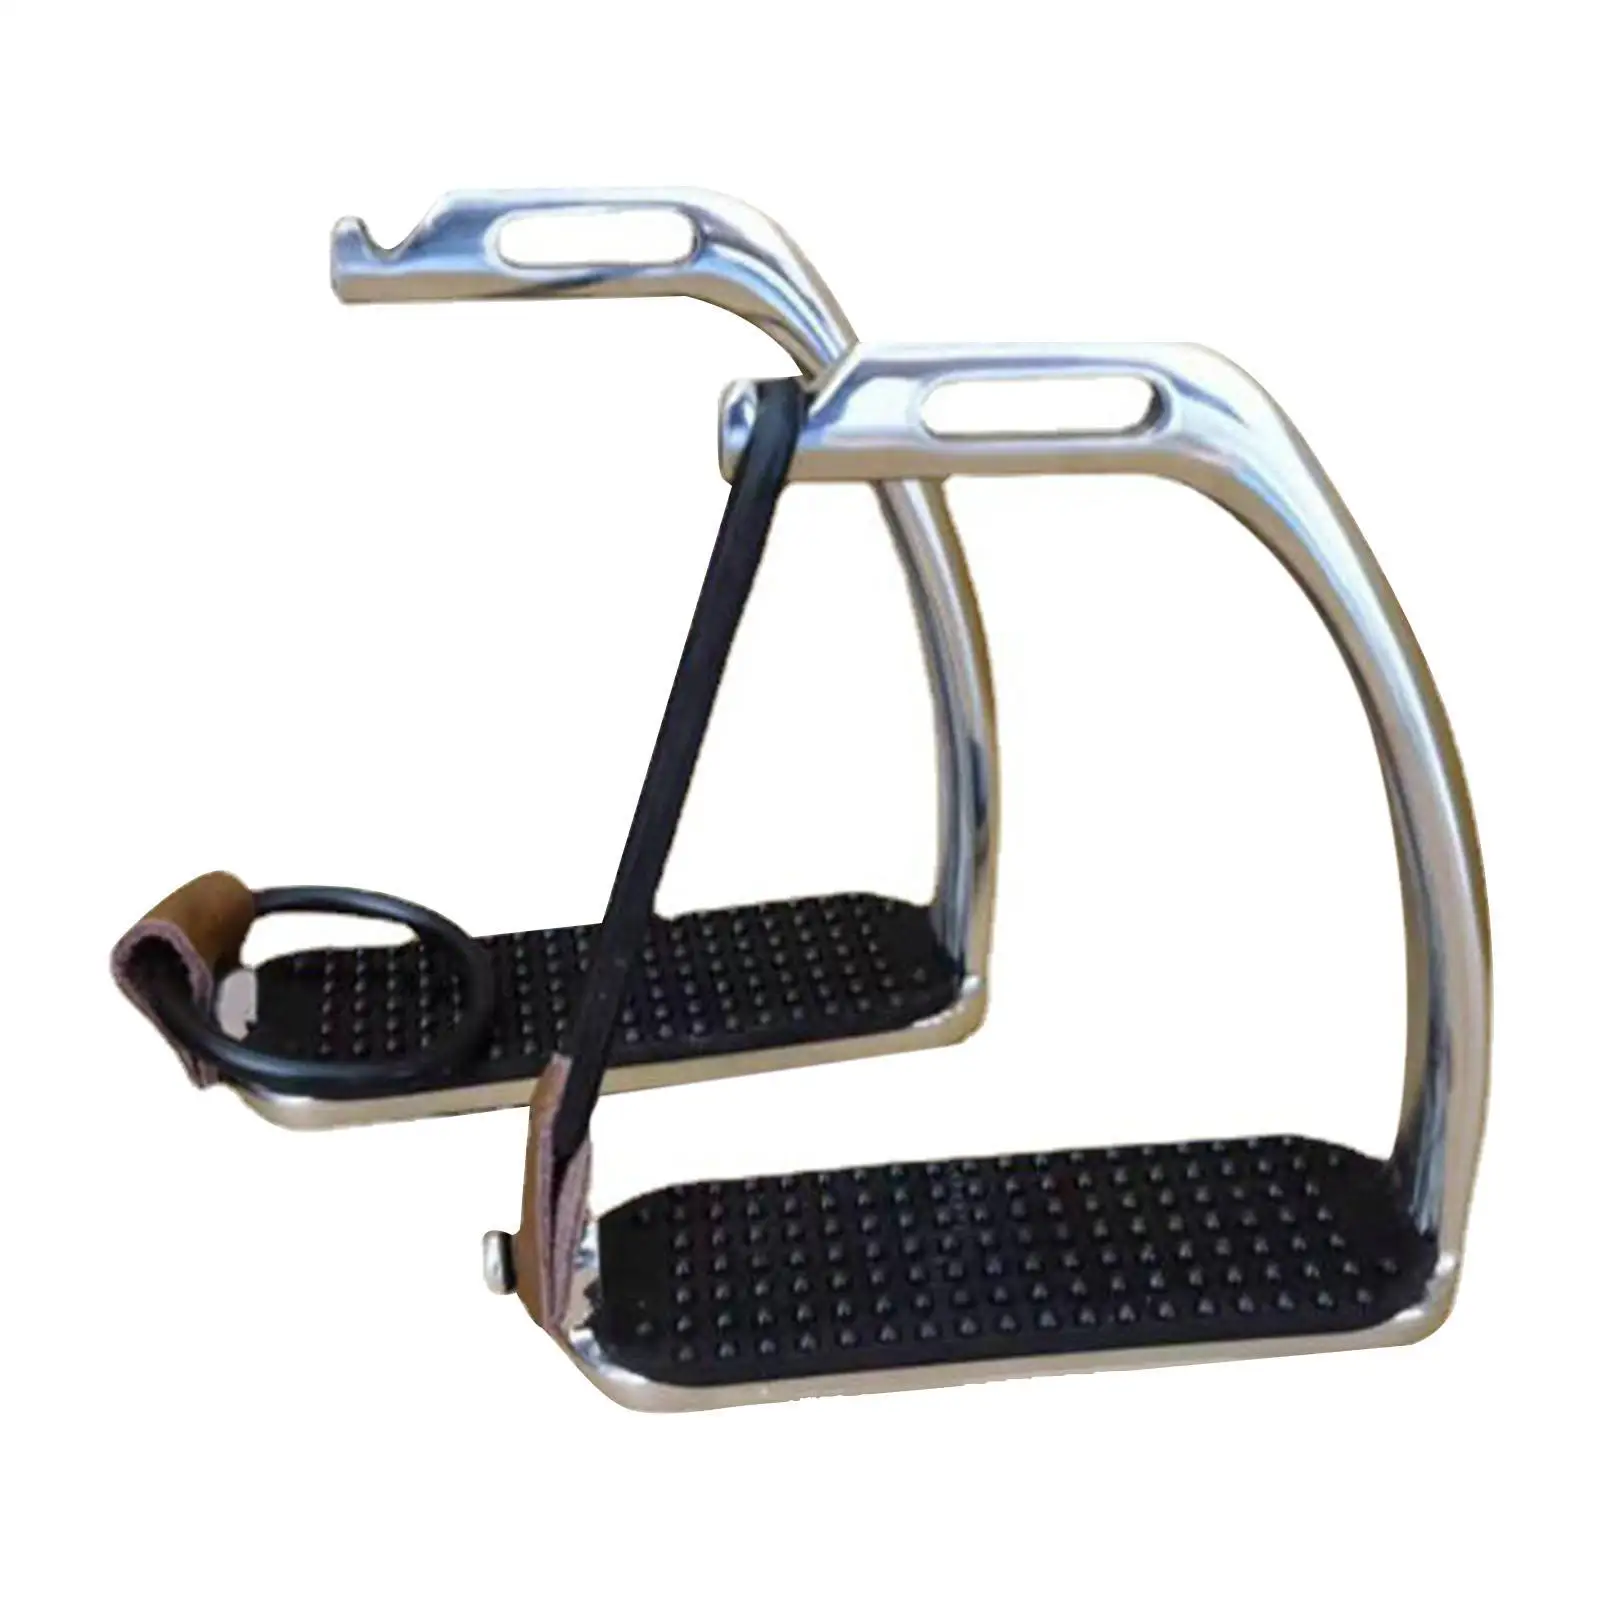 2x Thickening Anti Slip Durable Horse Riding Stirrups for Outdoor Supplies